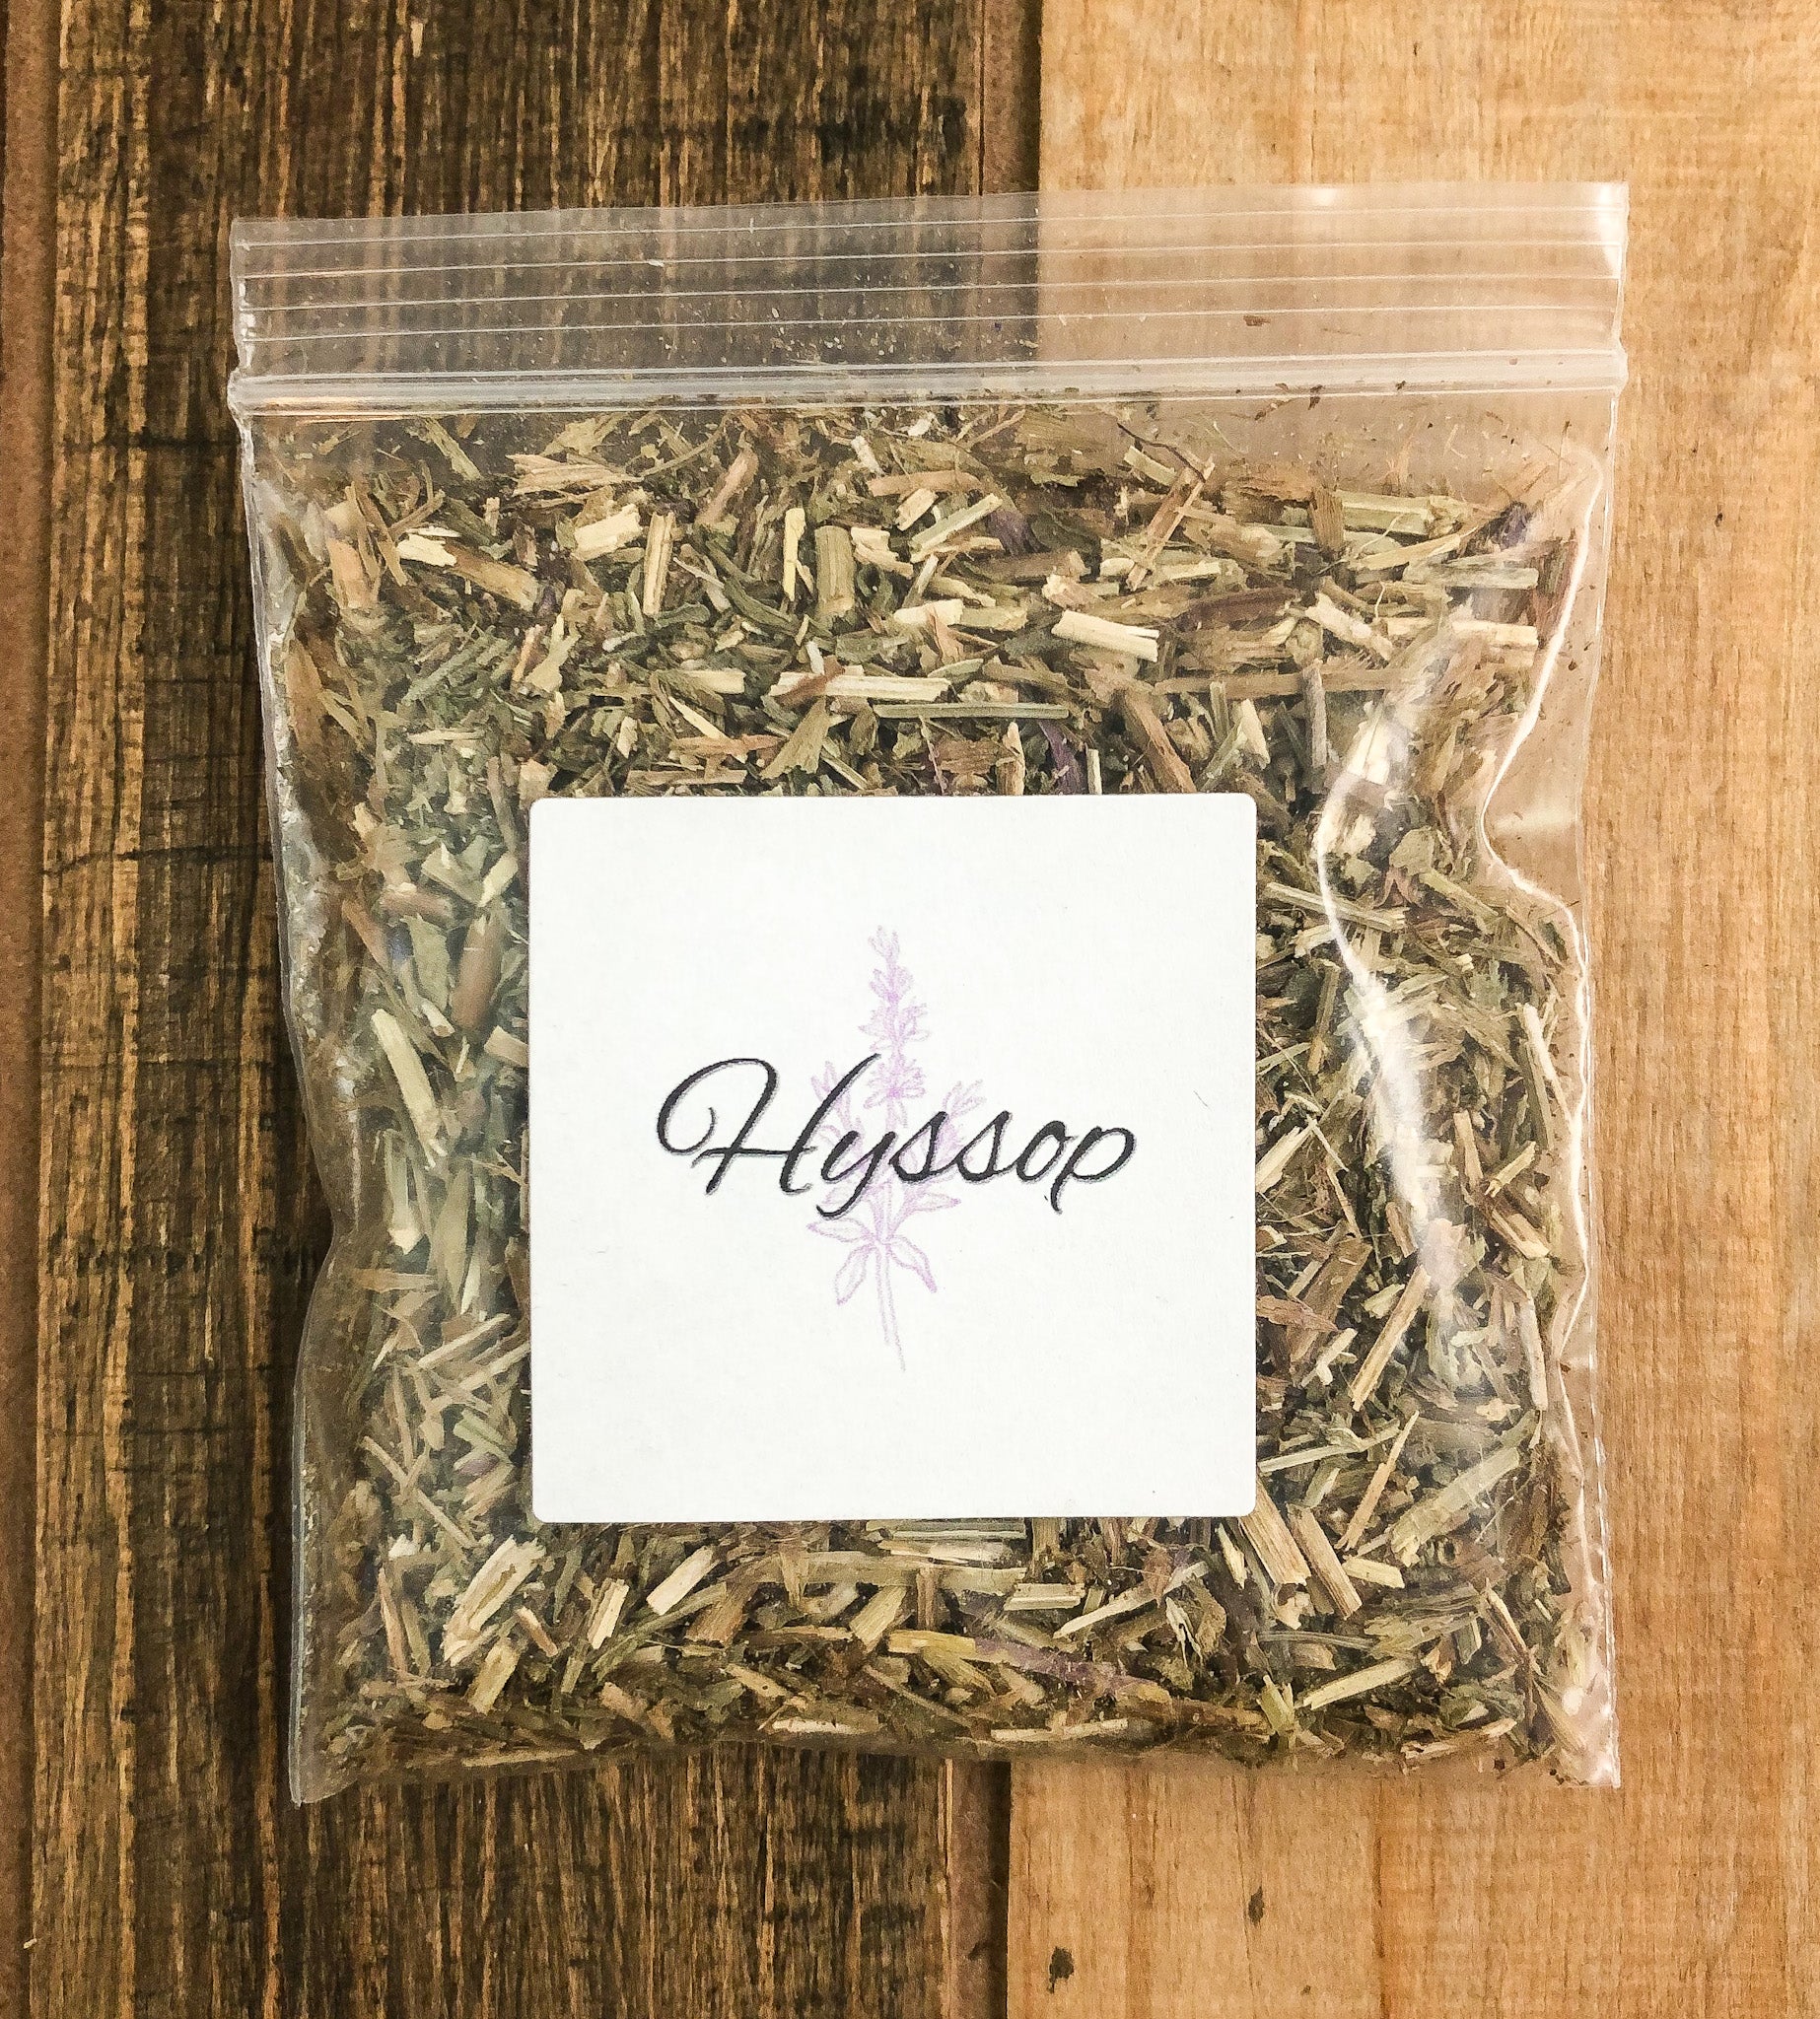 8g bag of dried hyssop in a clear plastic bag with a wooden background